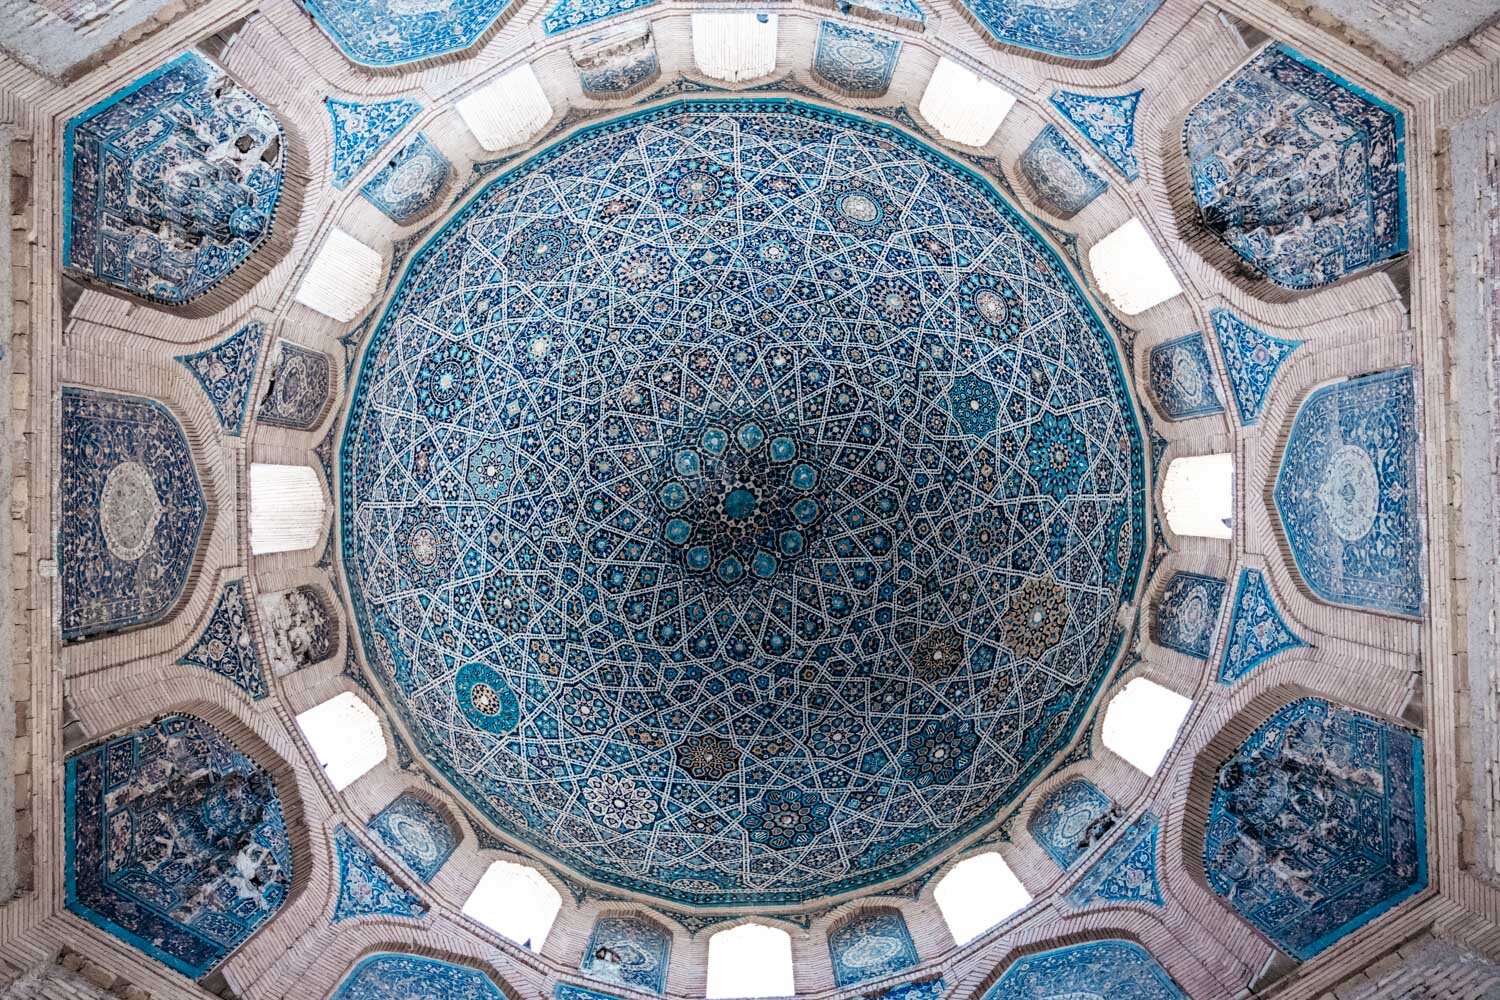  Inside of the dome of the Turabek-Khanum Mausoleum 